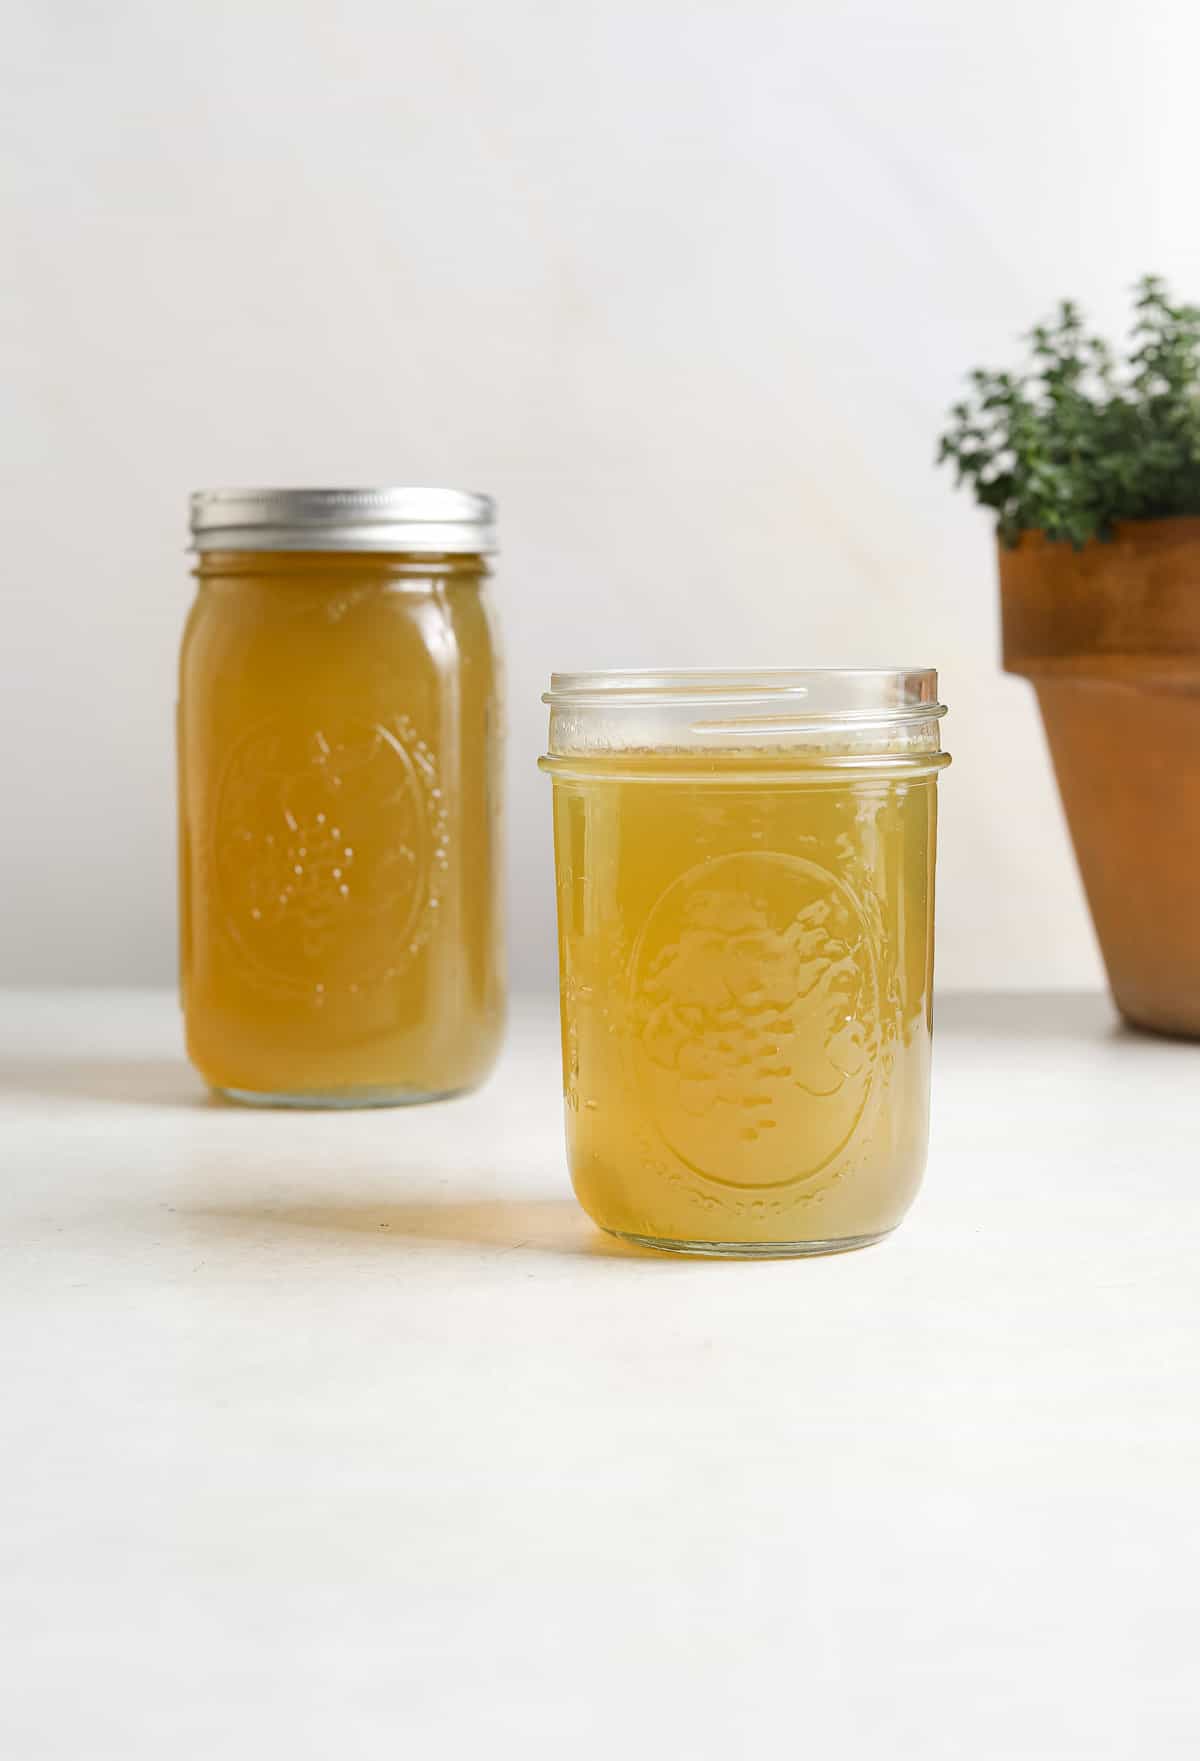 One large jar and one small jar of chicken stock on a white background.